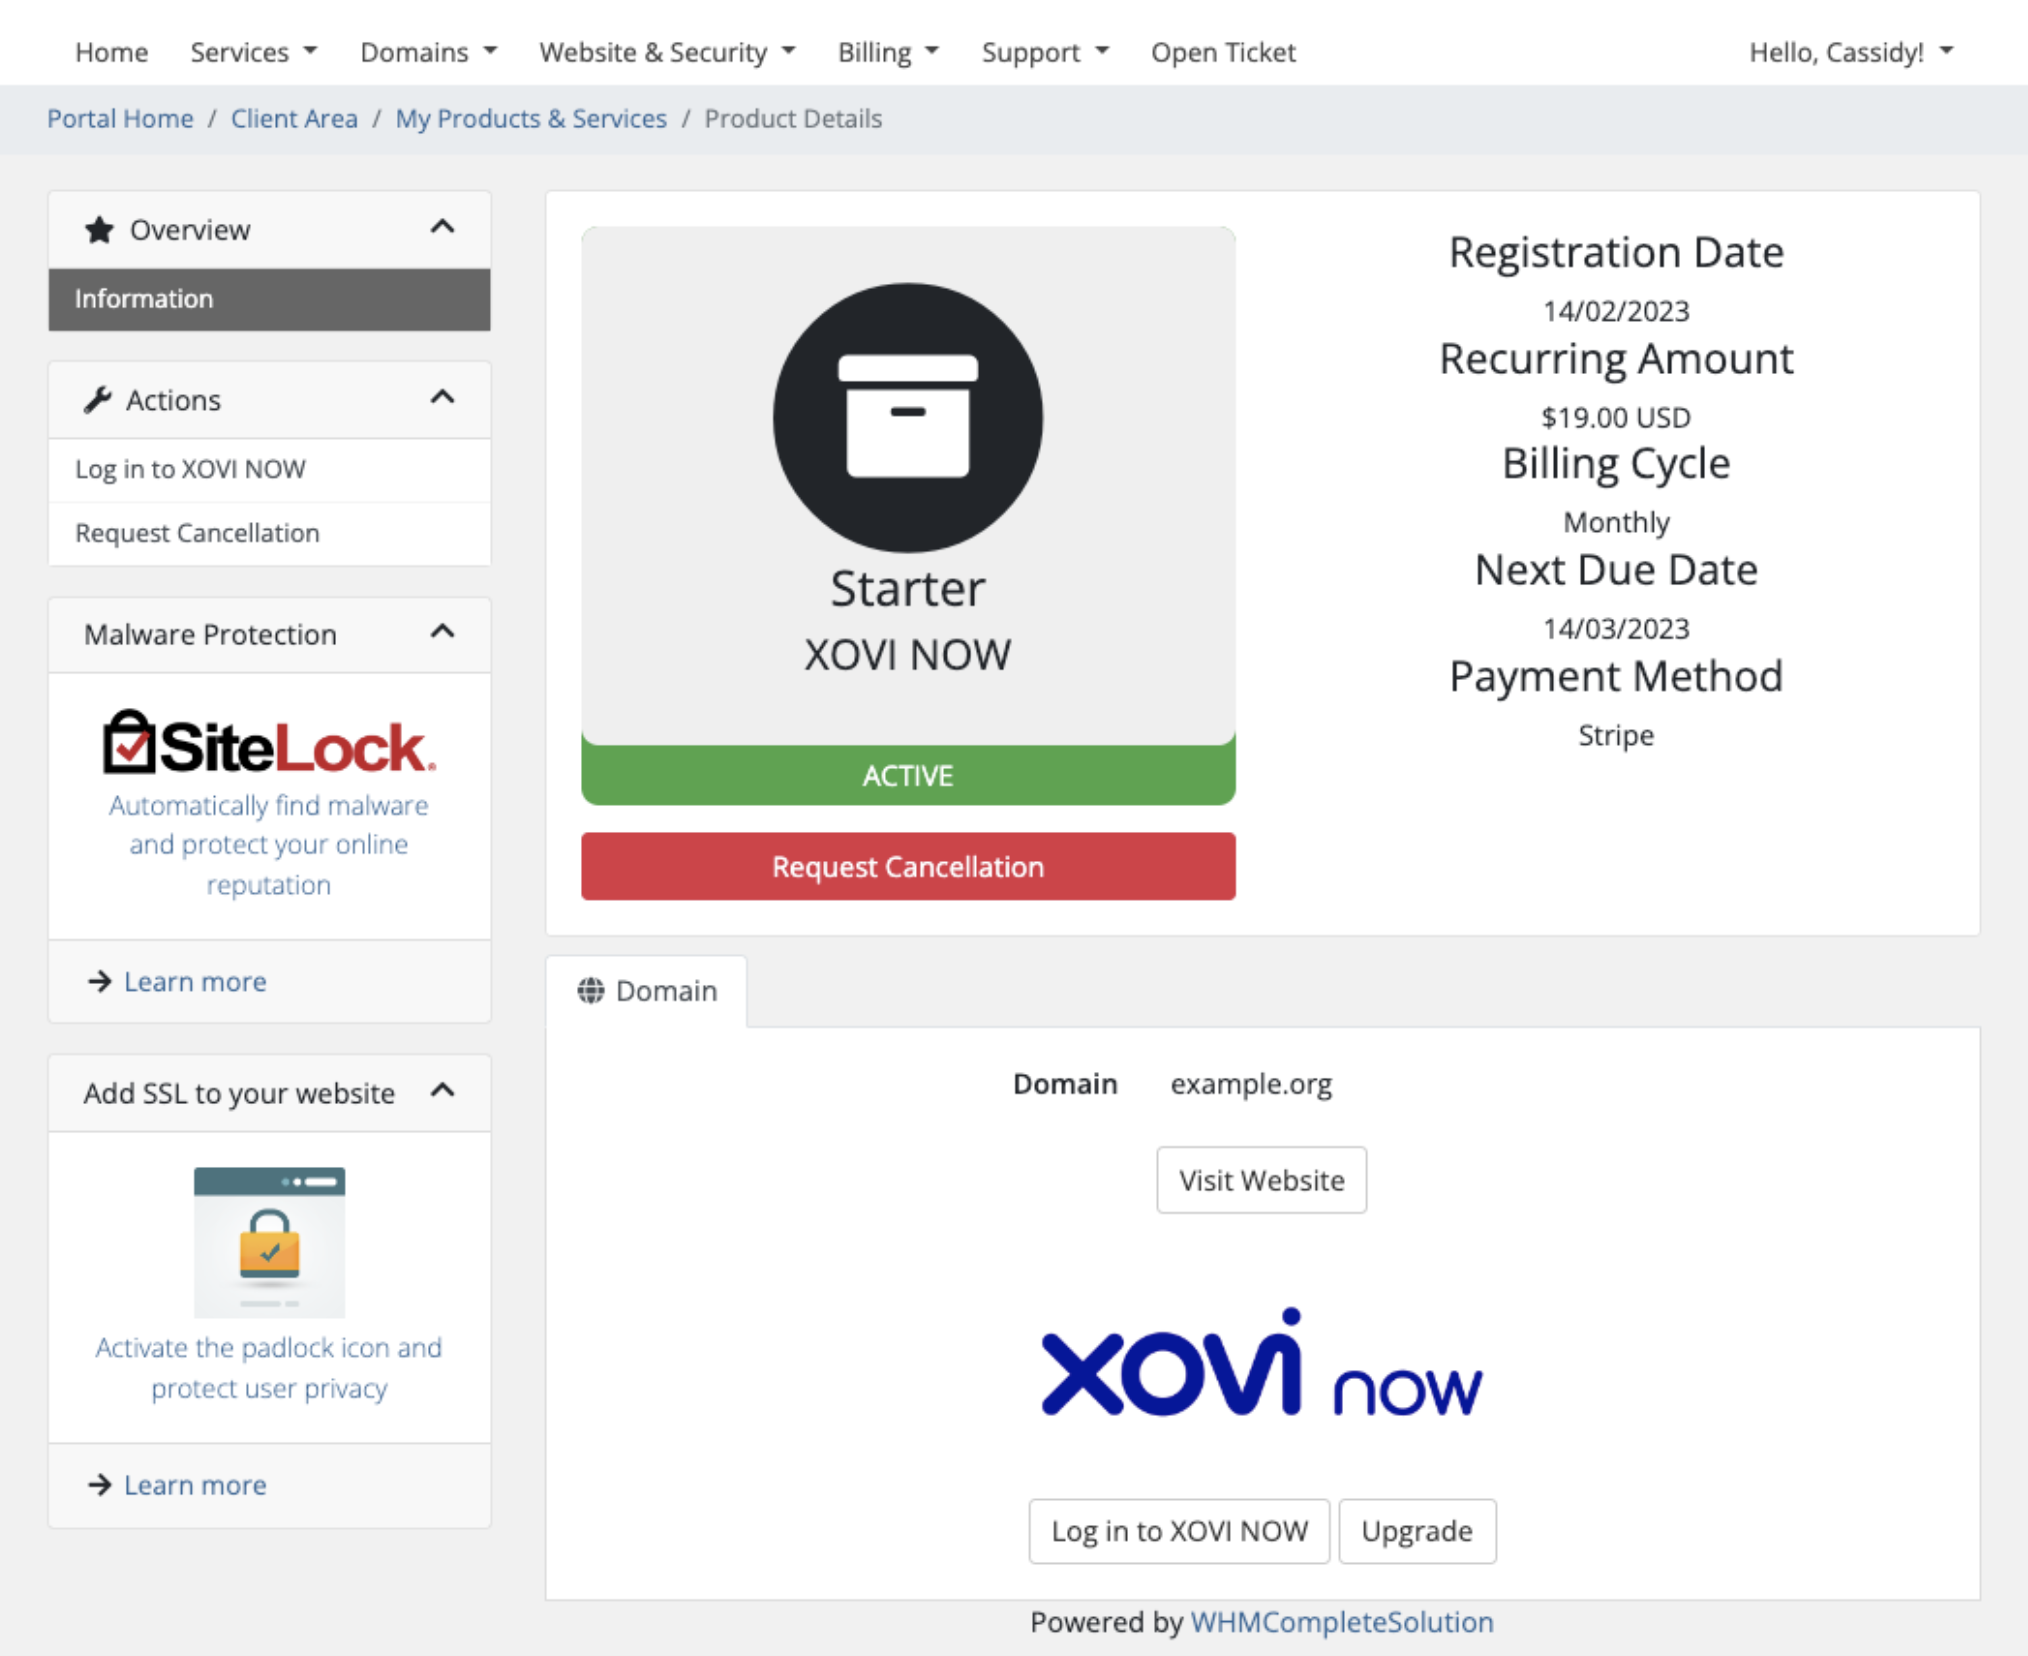 Log in to XOVI NOW in the Client Area